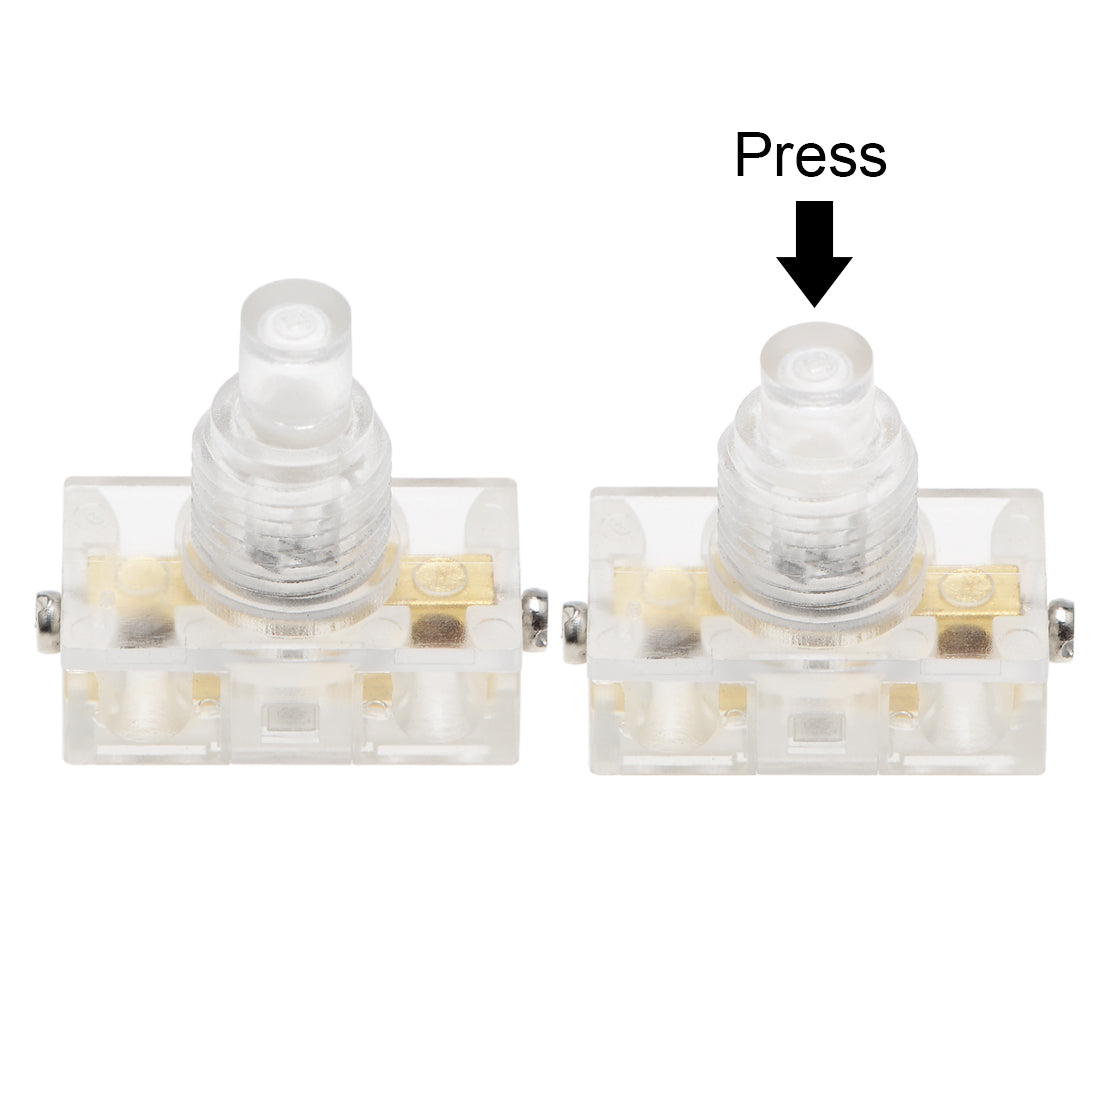 Uxcell Uxcell Inline Foot Pedal Push Button Switch, UFO Type Lamp Lighting Foot Control Latching ON/Off Footswitch Transparent 2 Pcs